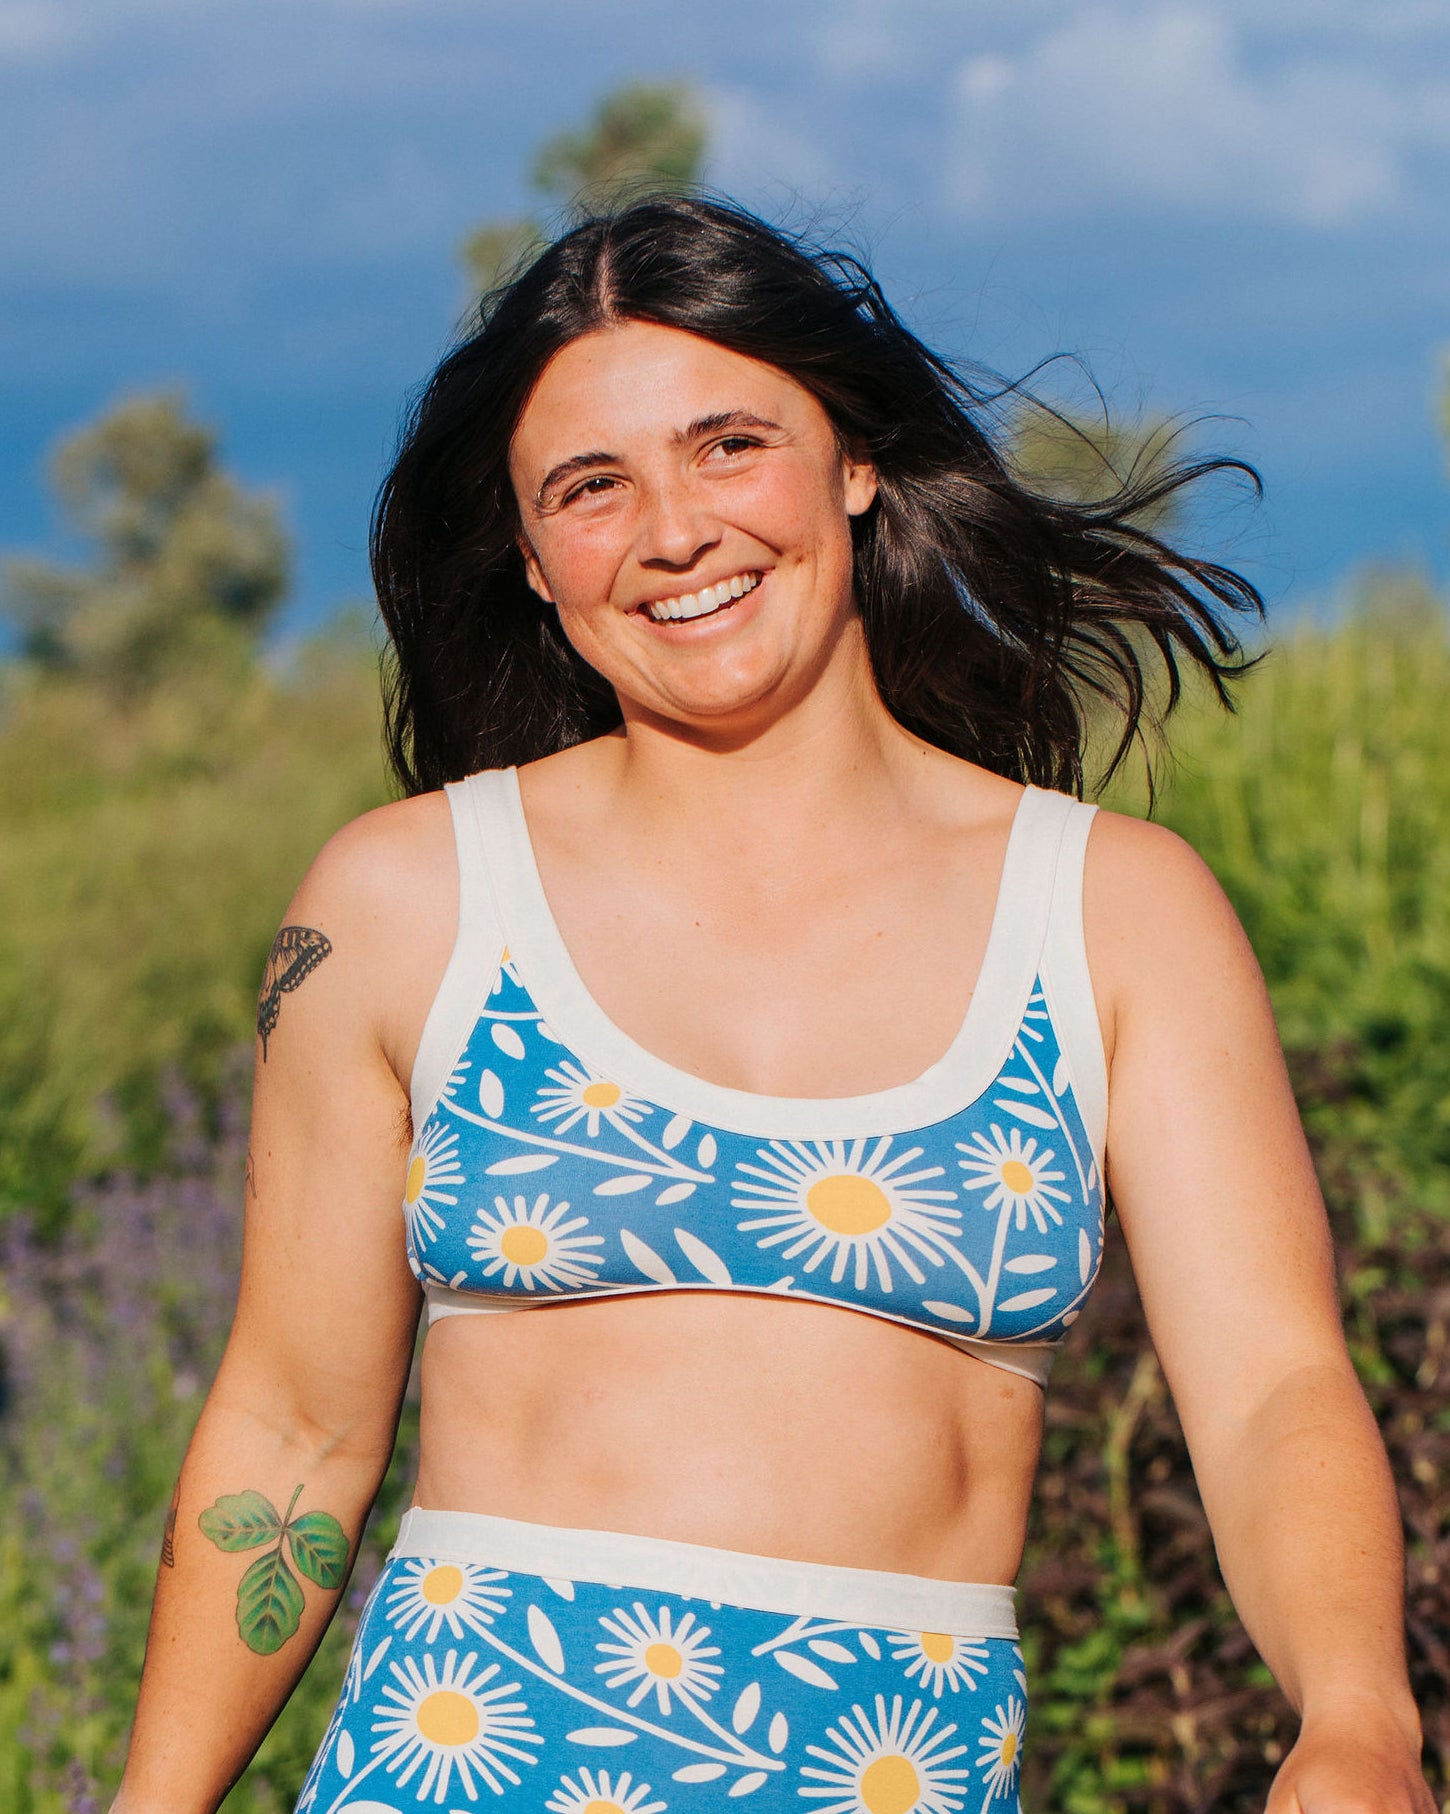 Close up of model wearing Thunderpants Bralette in Daisy Days print: blue with white and yellow daisies.